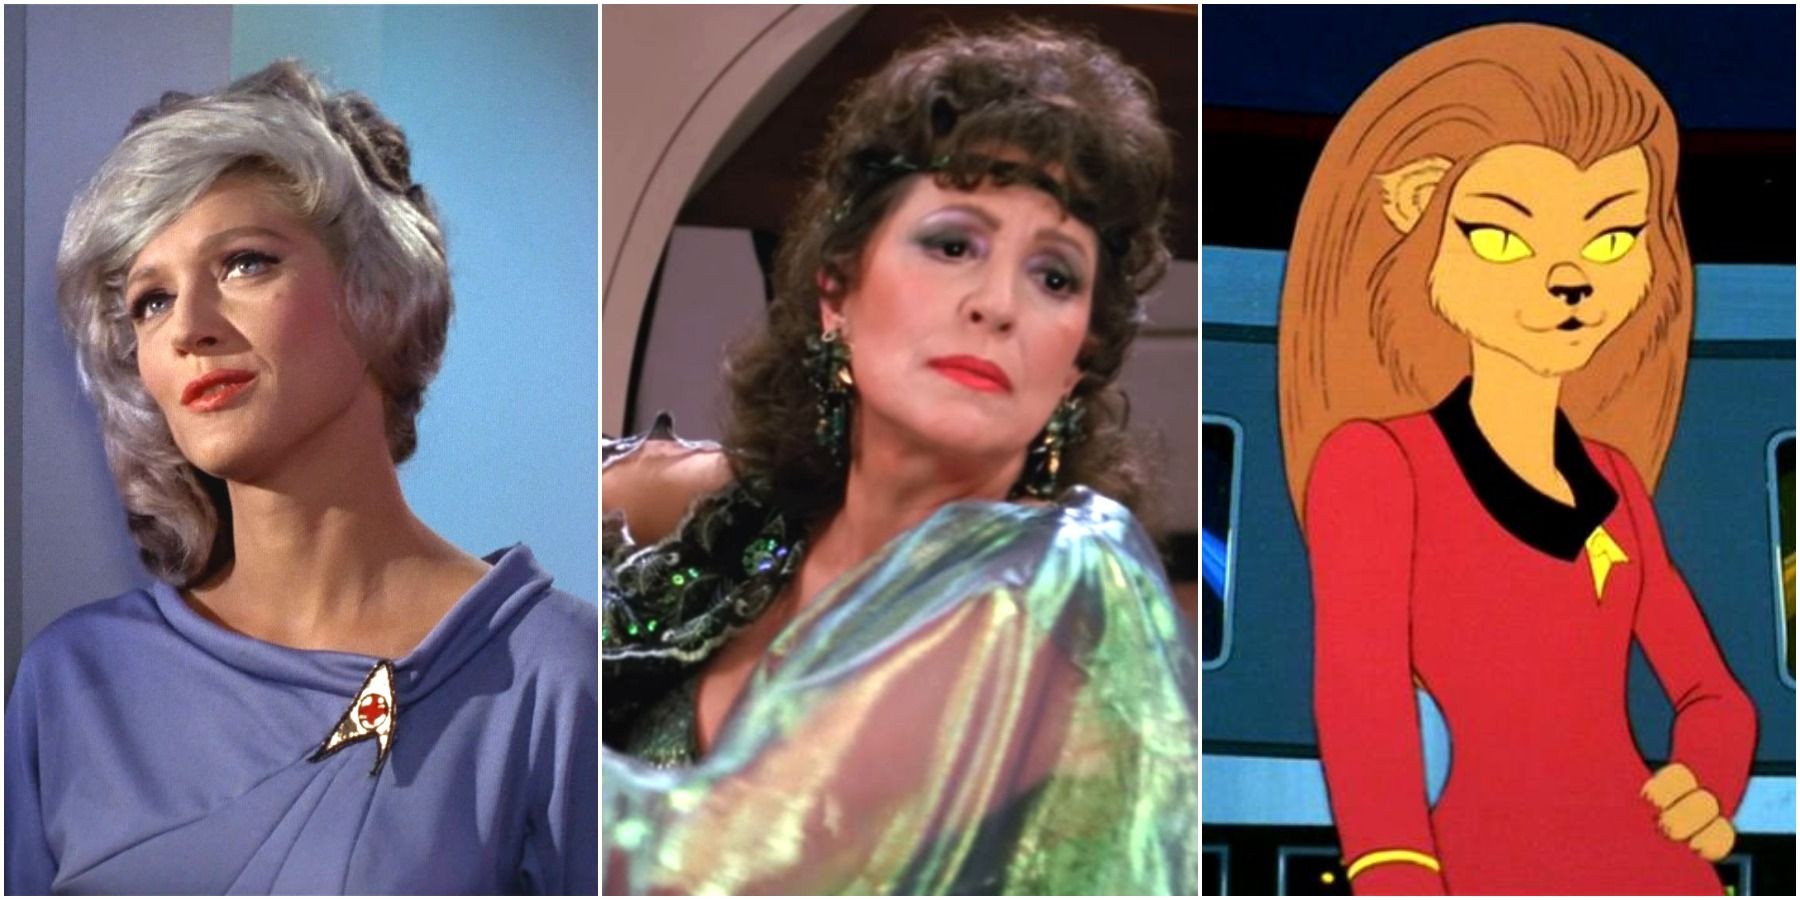 Majel Barrett as Christine Chapel in TOS, Lwaxana Troi in TNG and DS9, and an animated alien